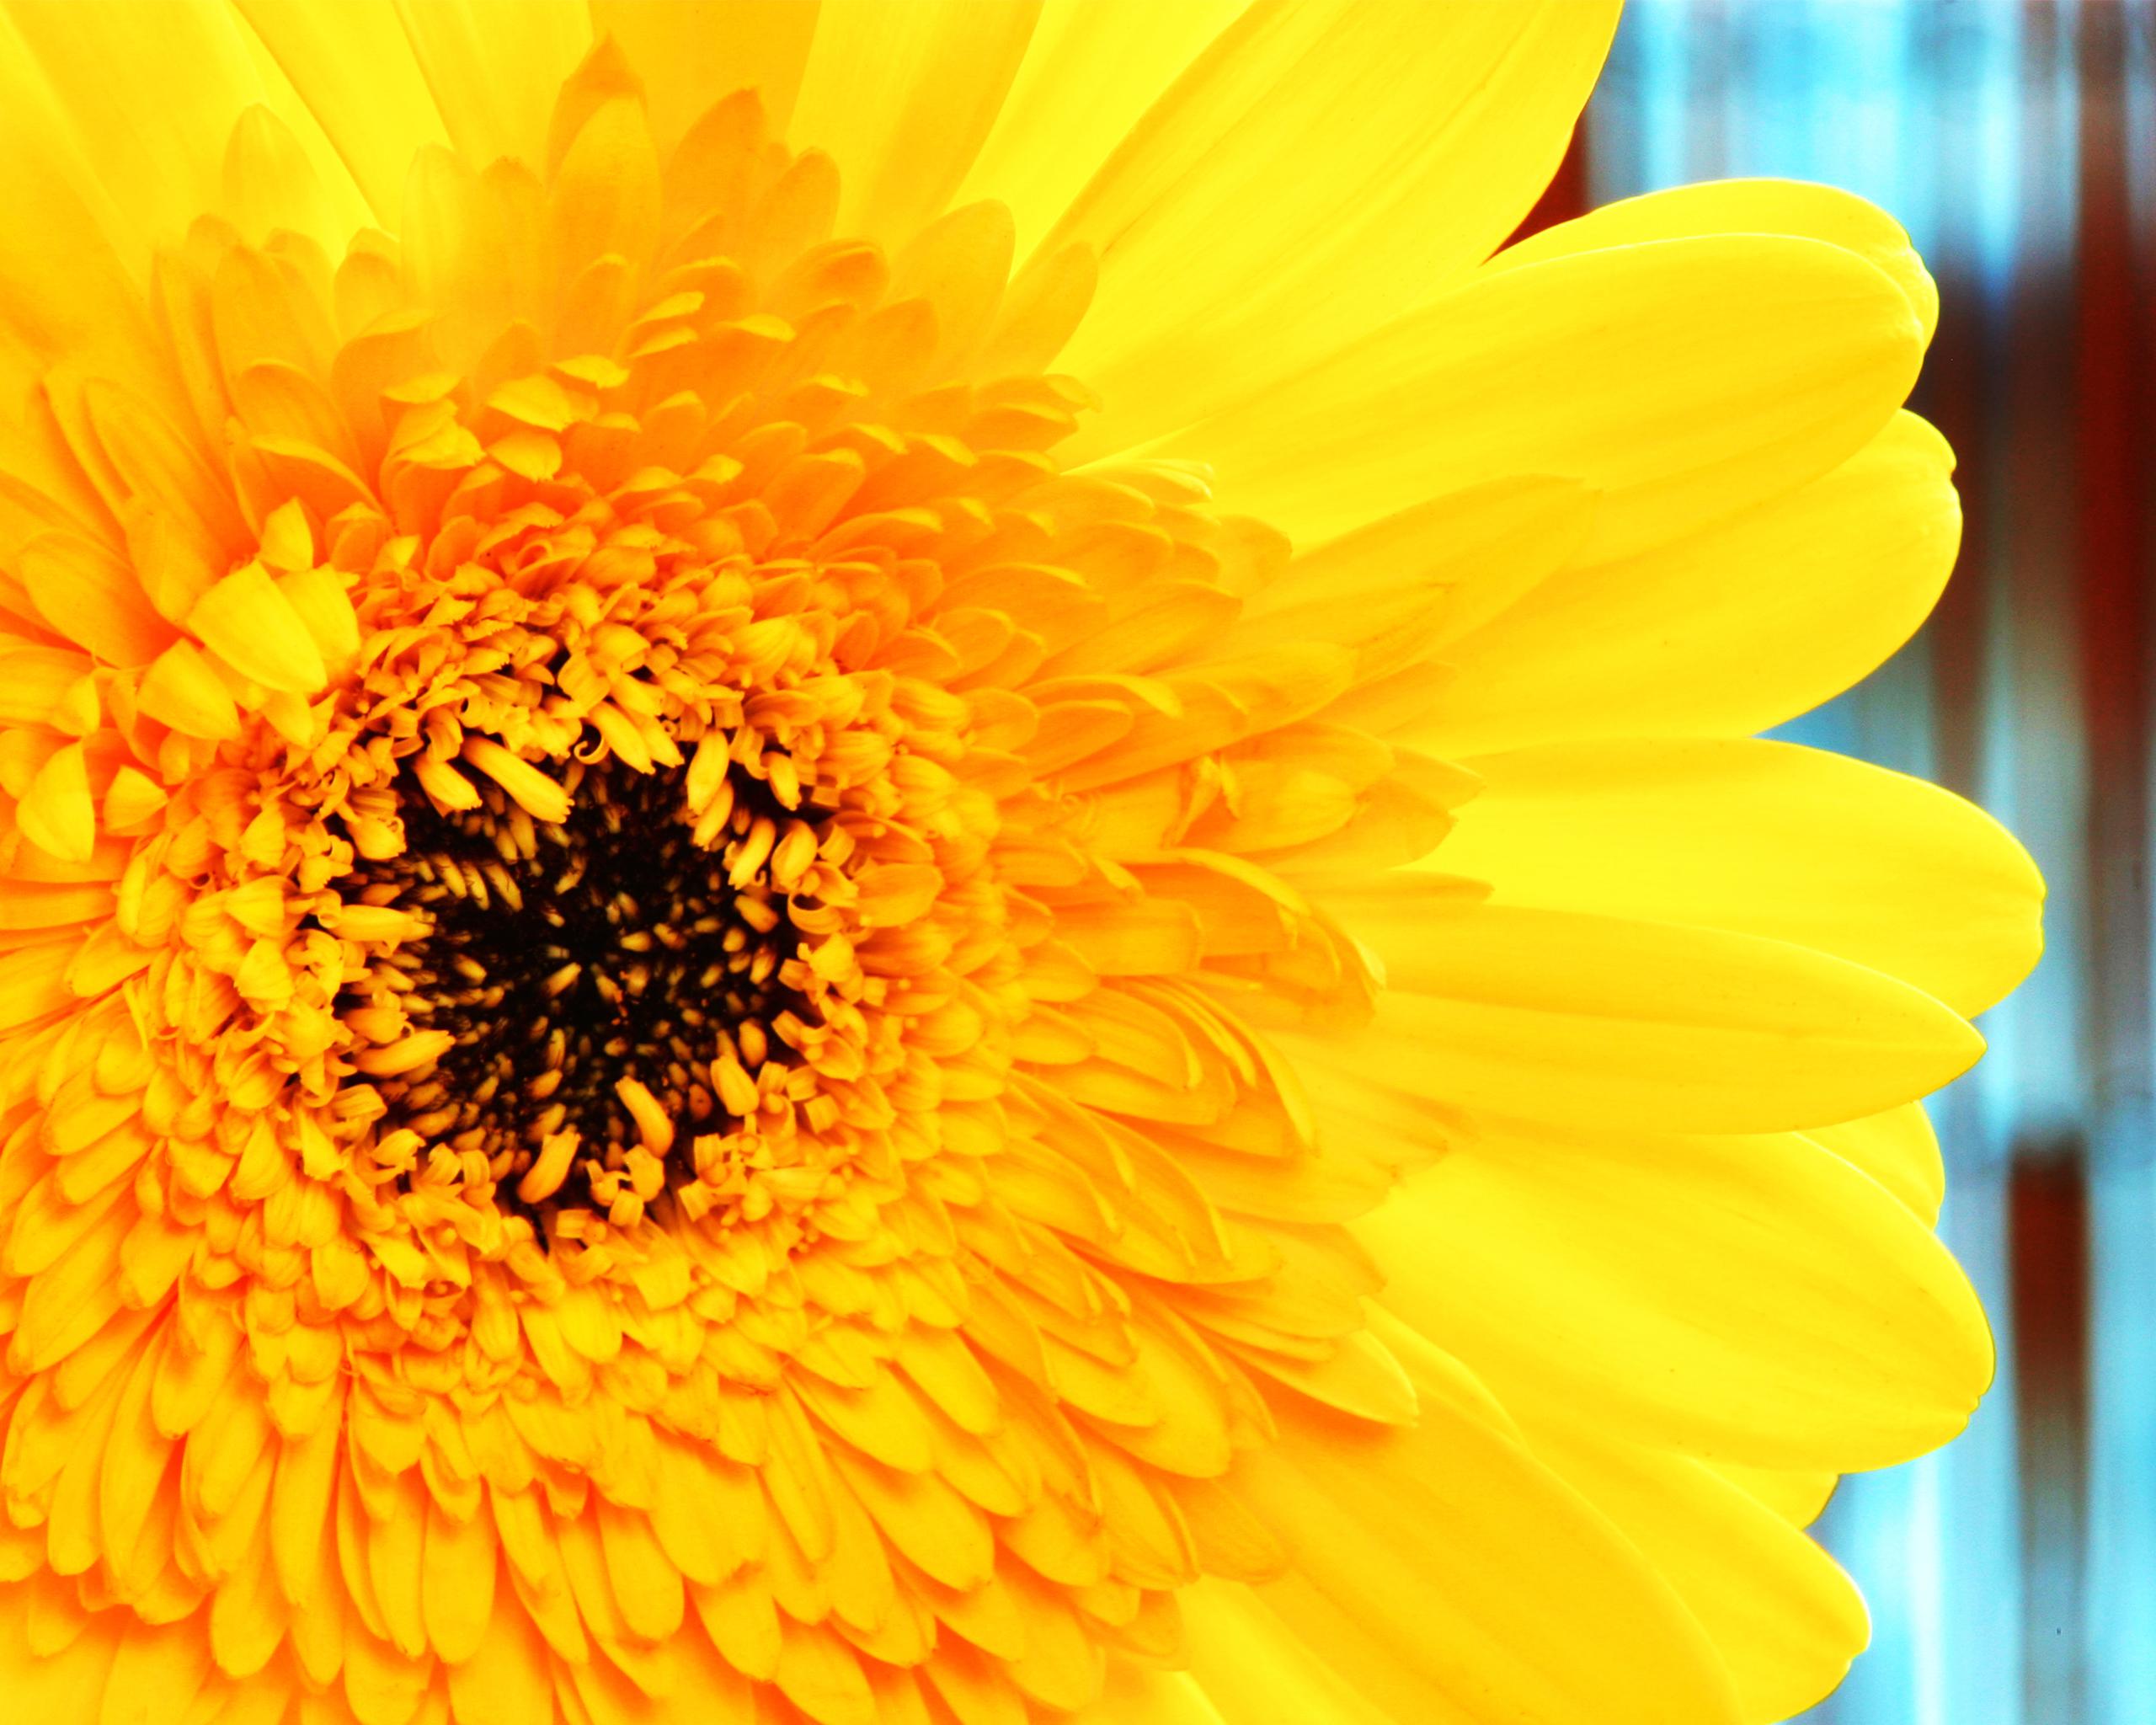 Yellow gerber daisy - (#141356) - High Quality and Resolution ...